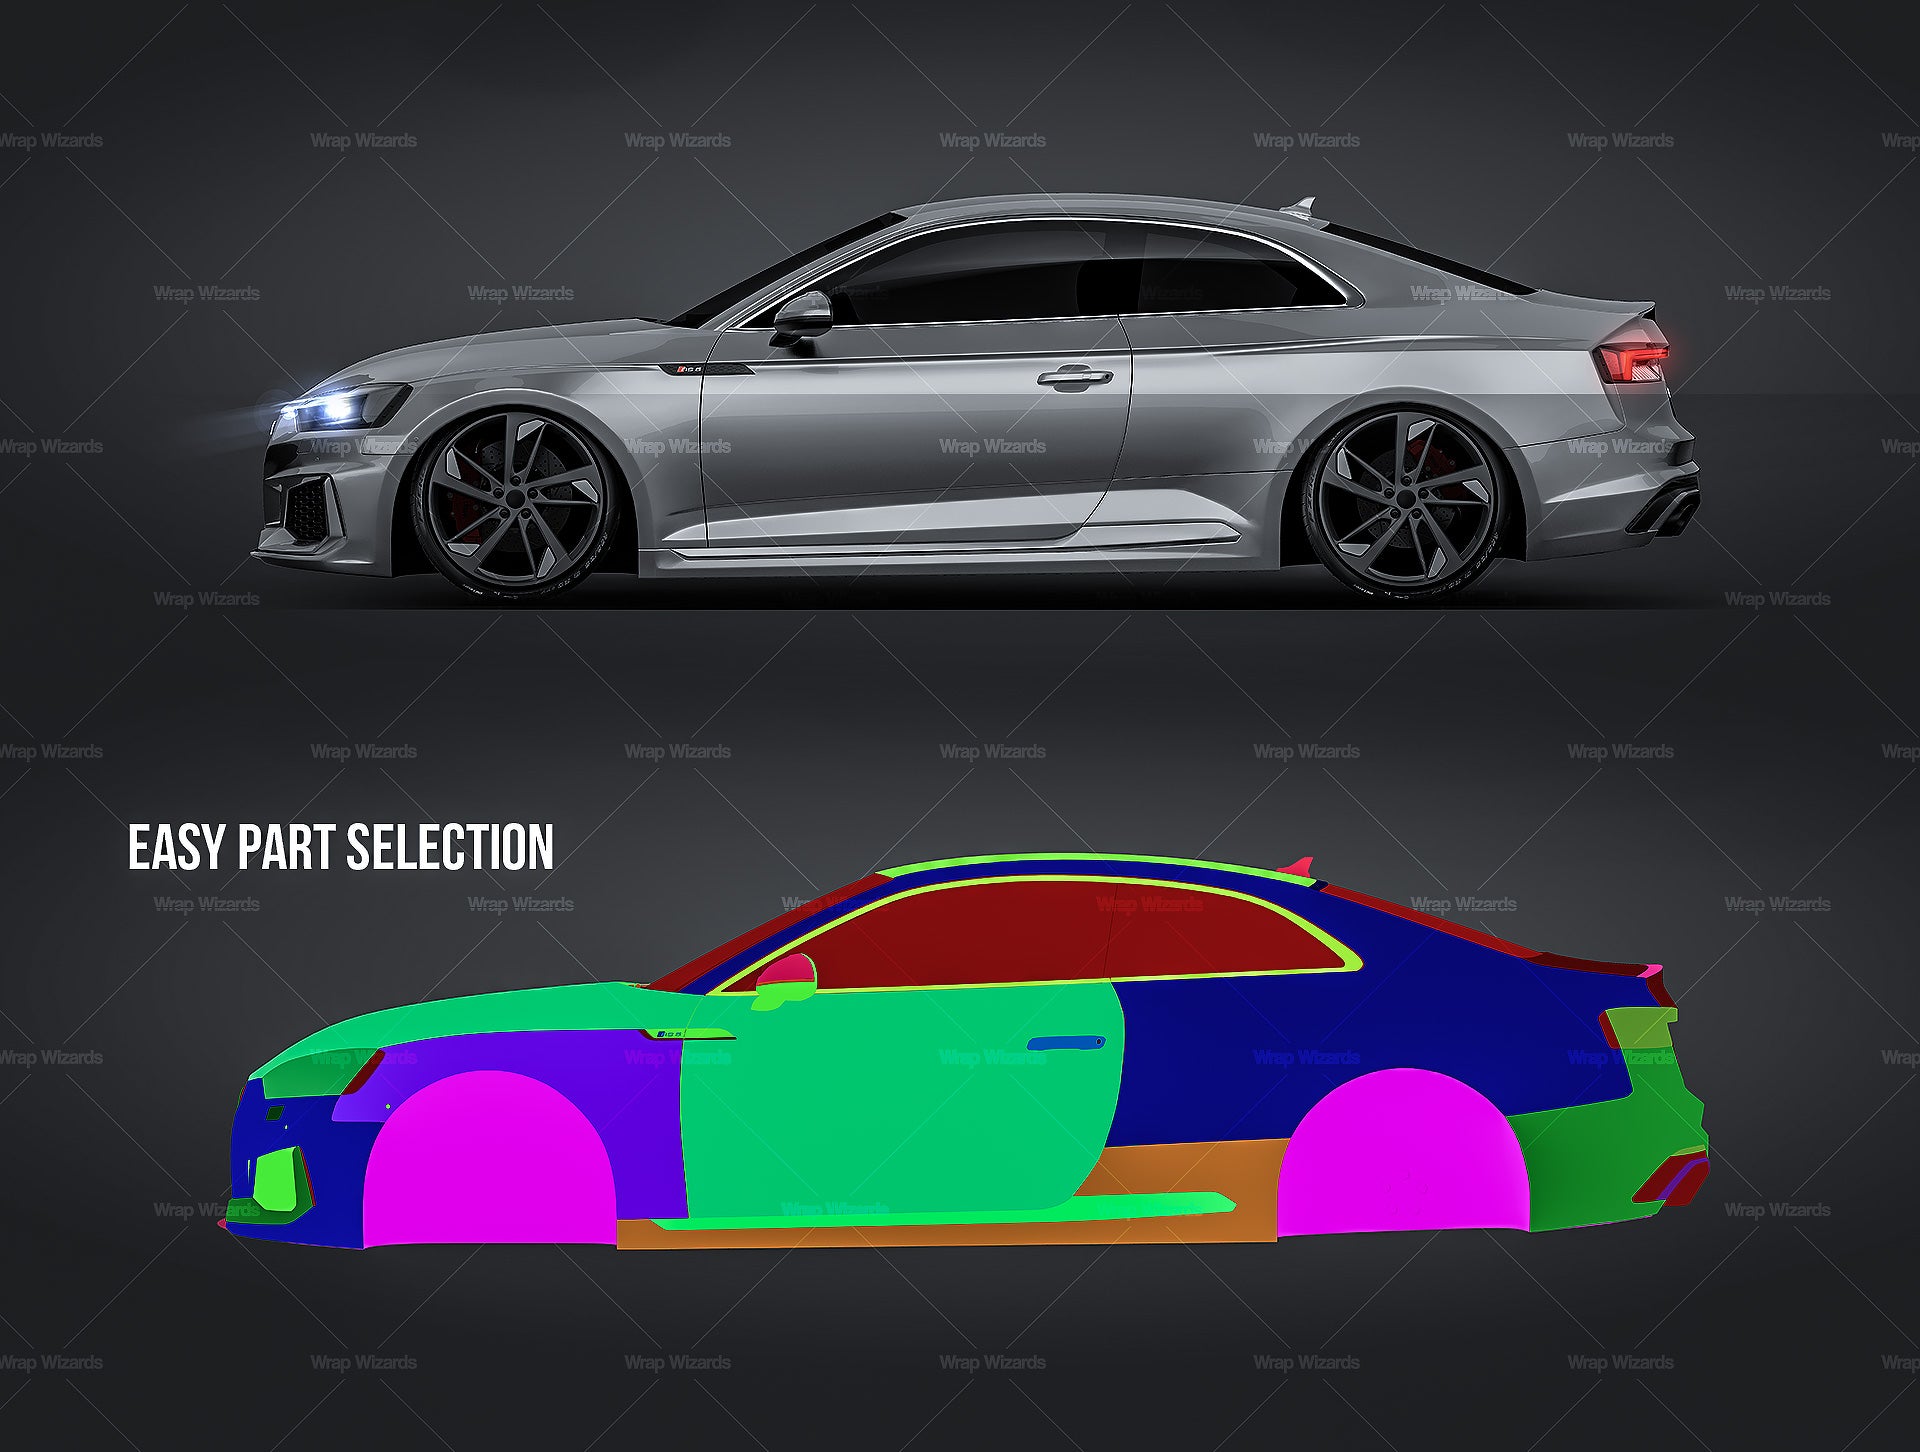 Audi RS5 2018 glossy finish - all sides Car Mockup Template.psd